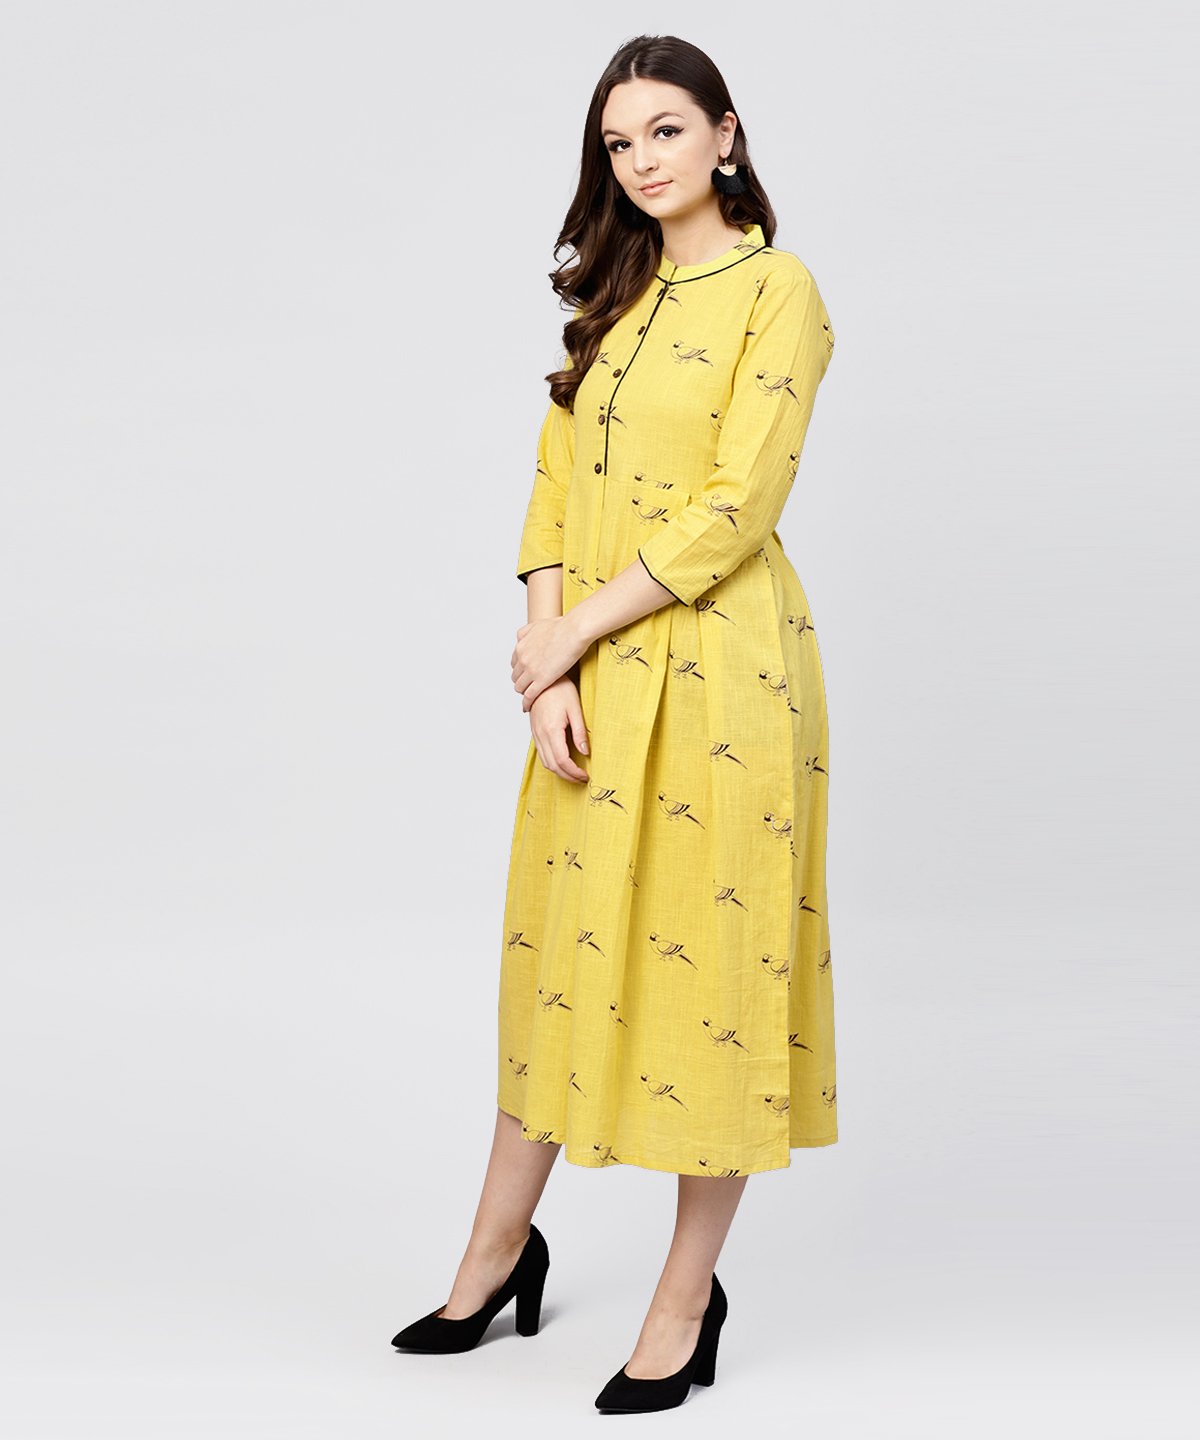 Women's Mustard Full Sleeves Cotton Maxi Dress With Madarin Collar And Front Placket - Nayo Clothing